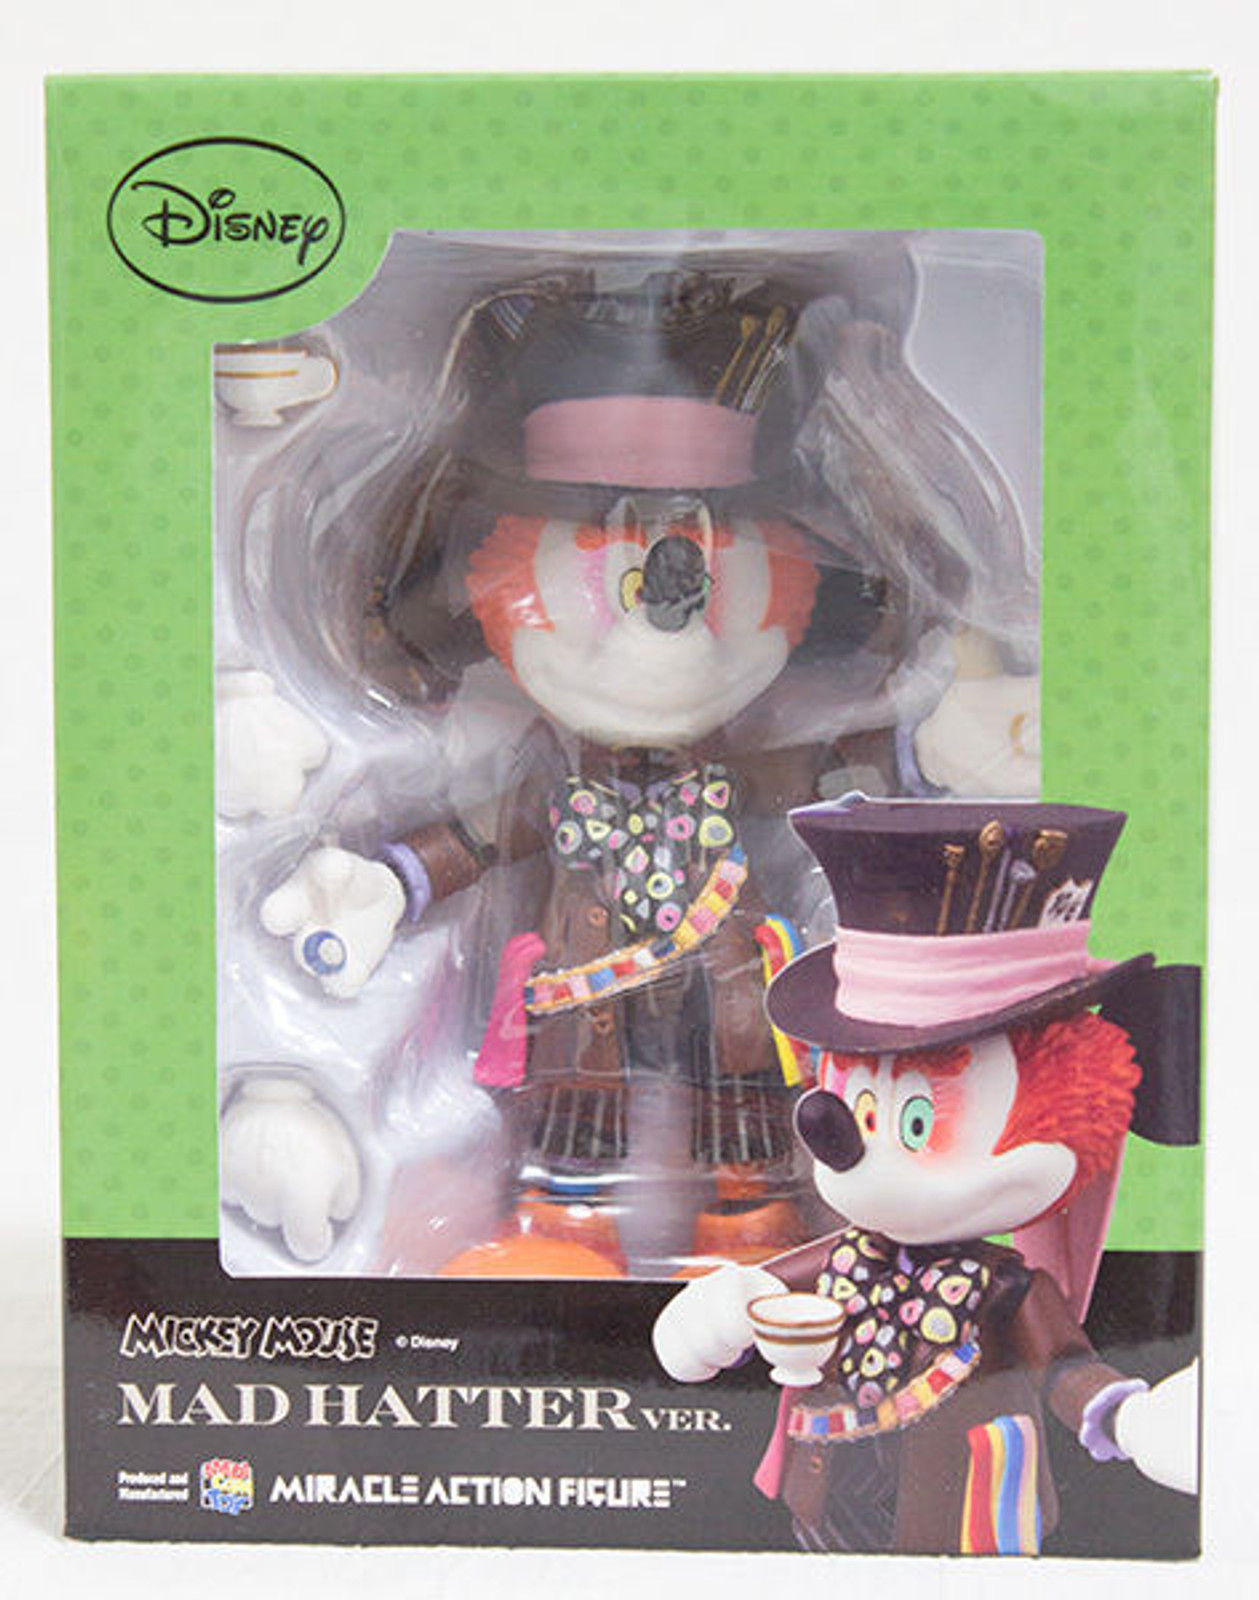 Disney Mickey Mouse Mad Hatter Miracle Action Figure  Medicom JAPAN ANIME